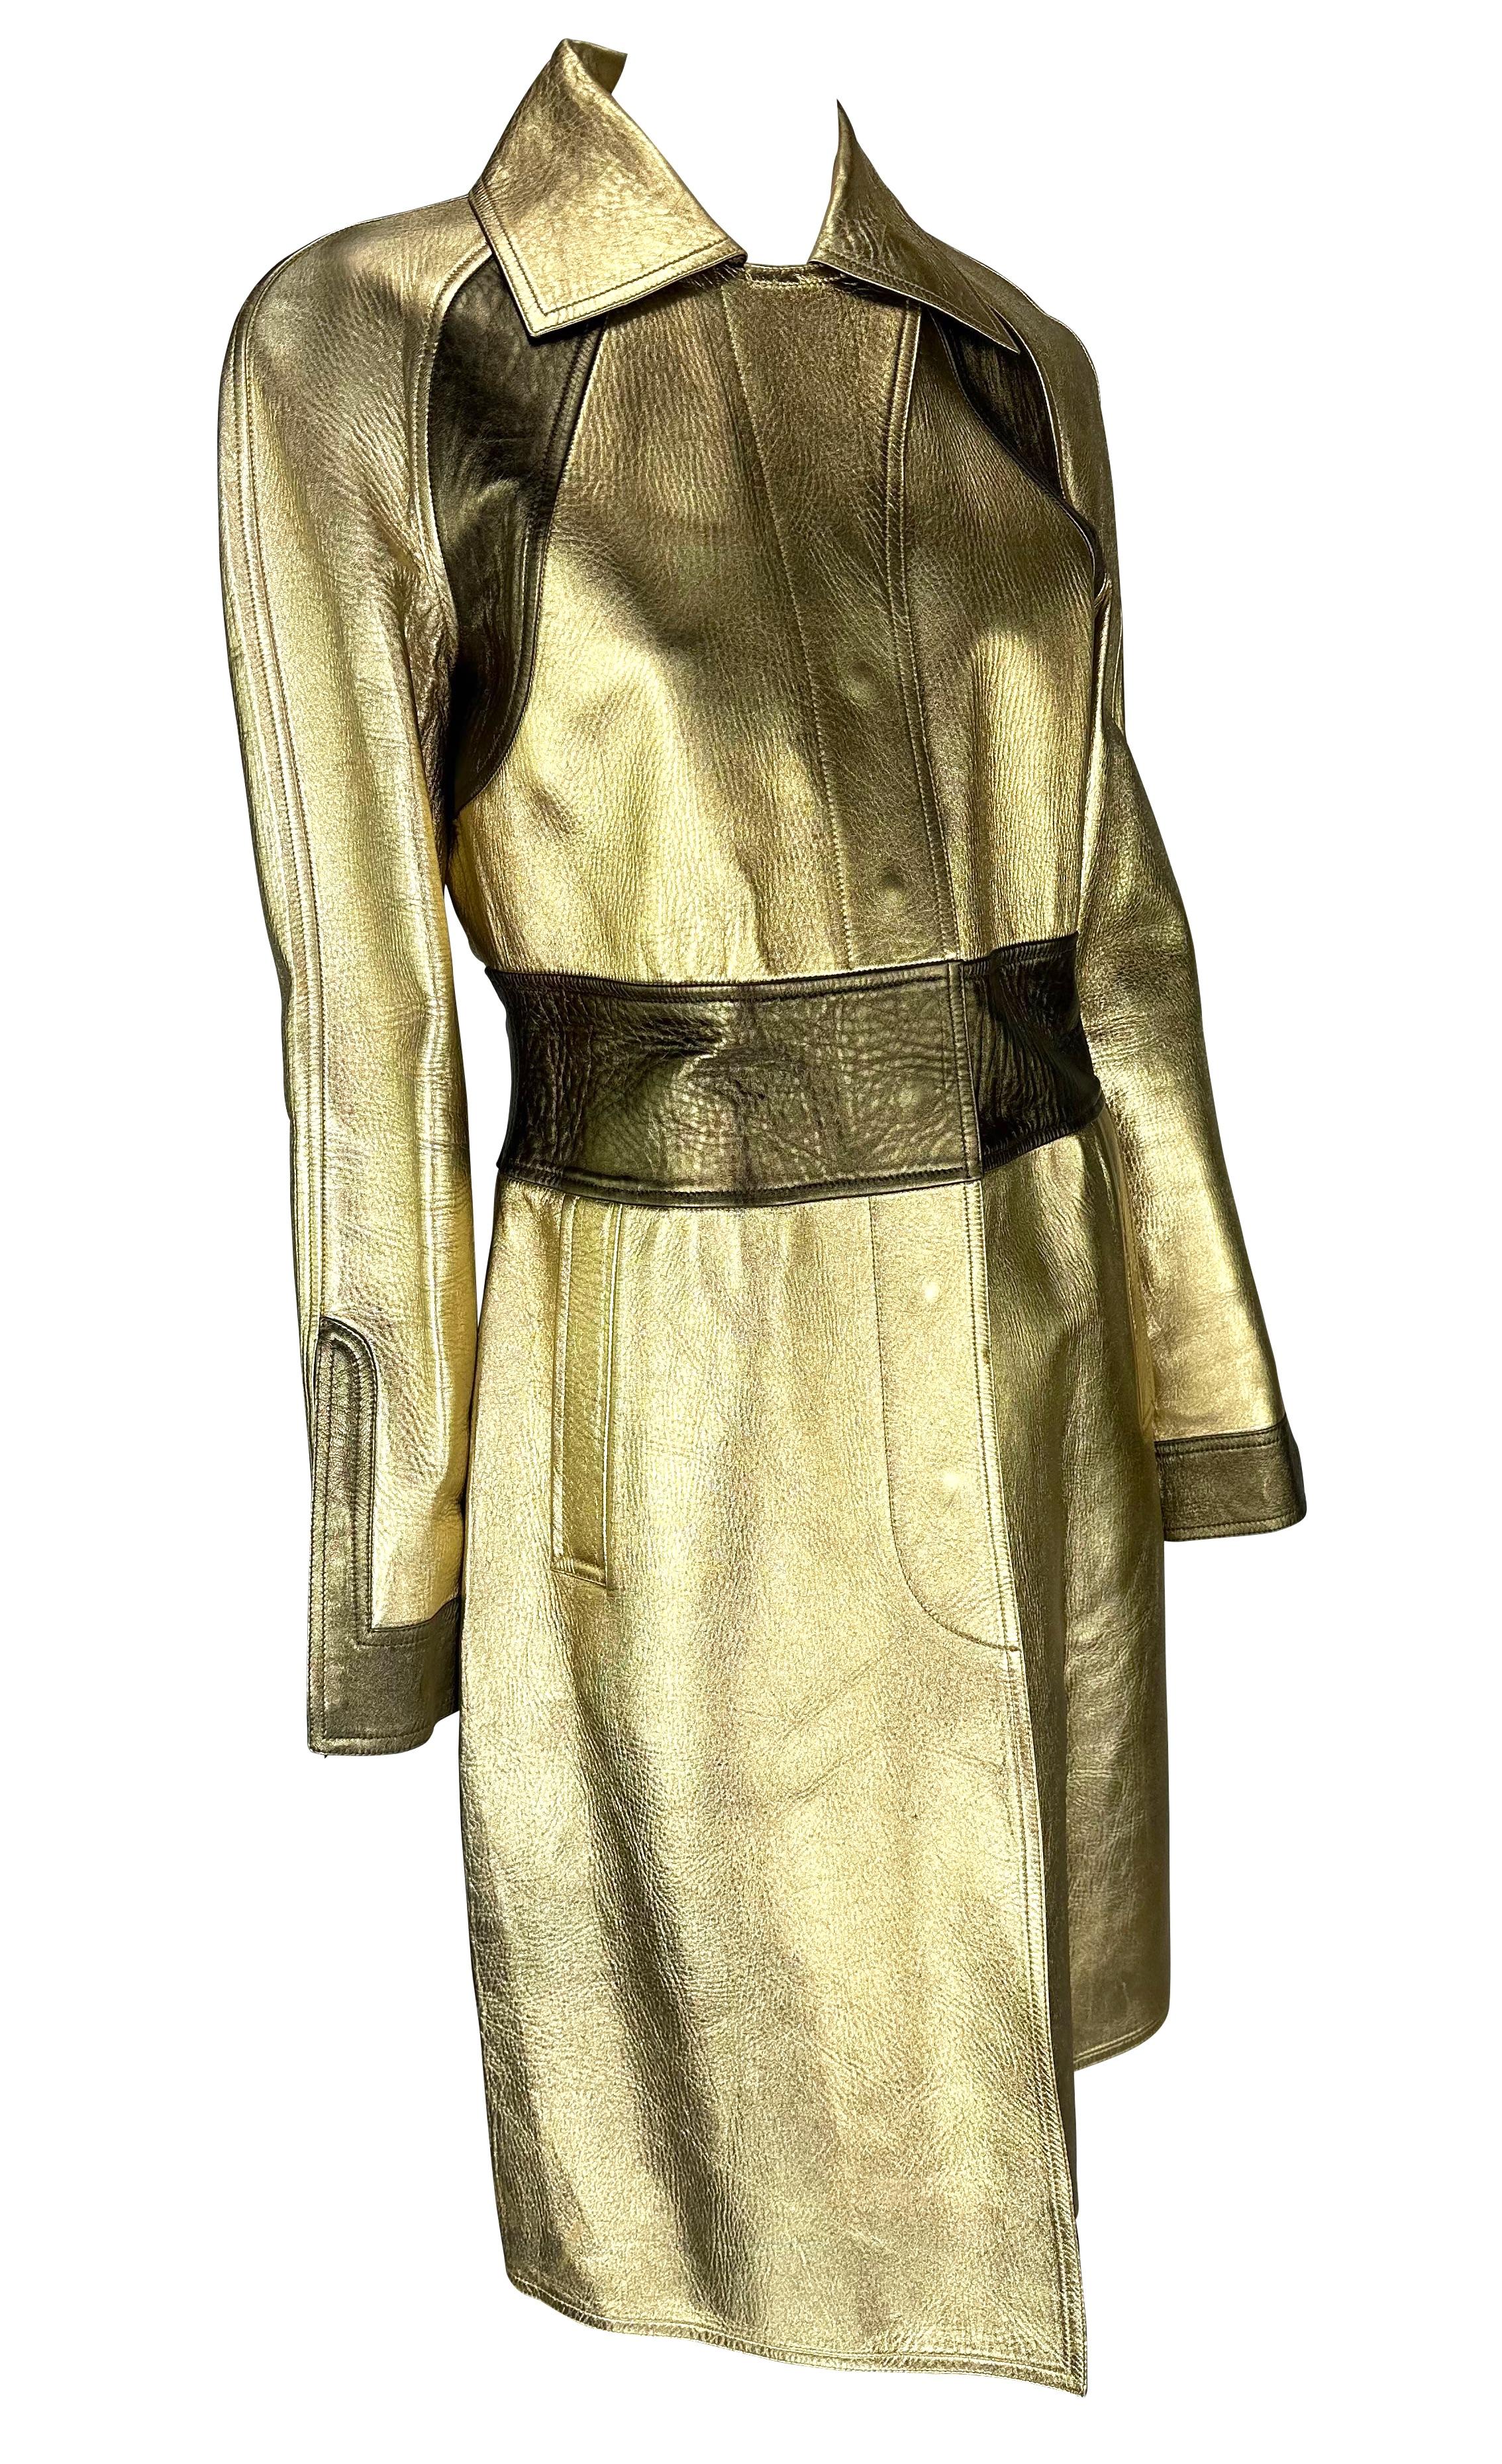 F/W 2000 Gucci by Tom Ford Runway Ad Two-Tone Gold Metallic Leather Coat 1